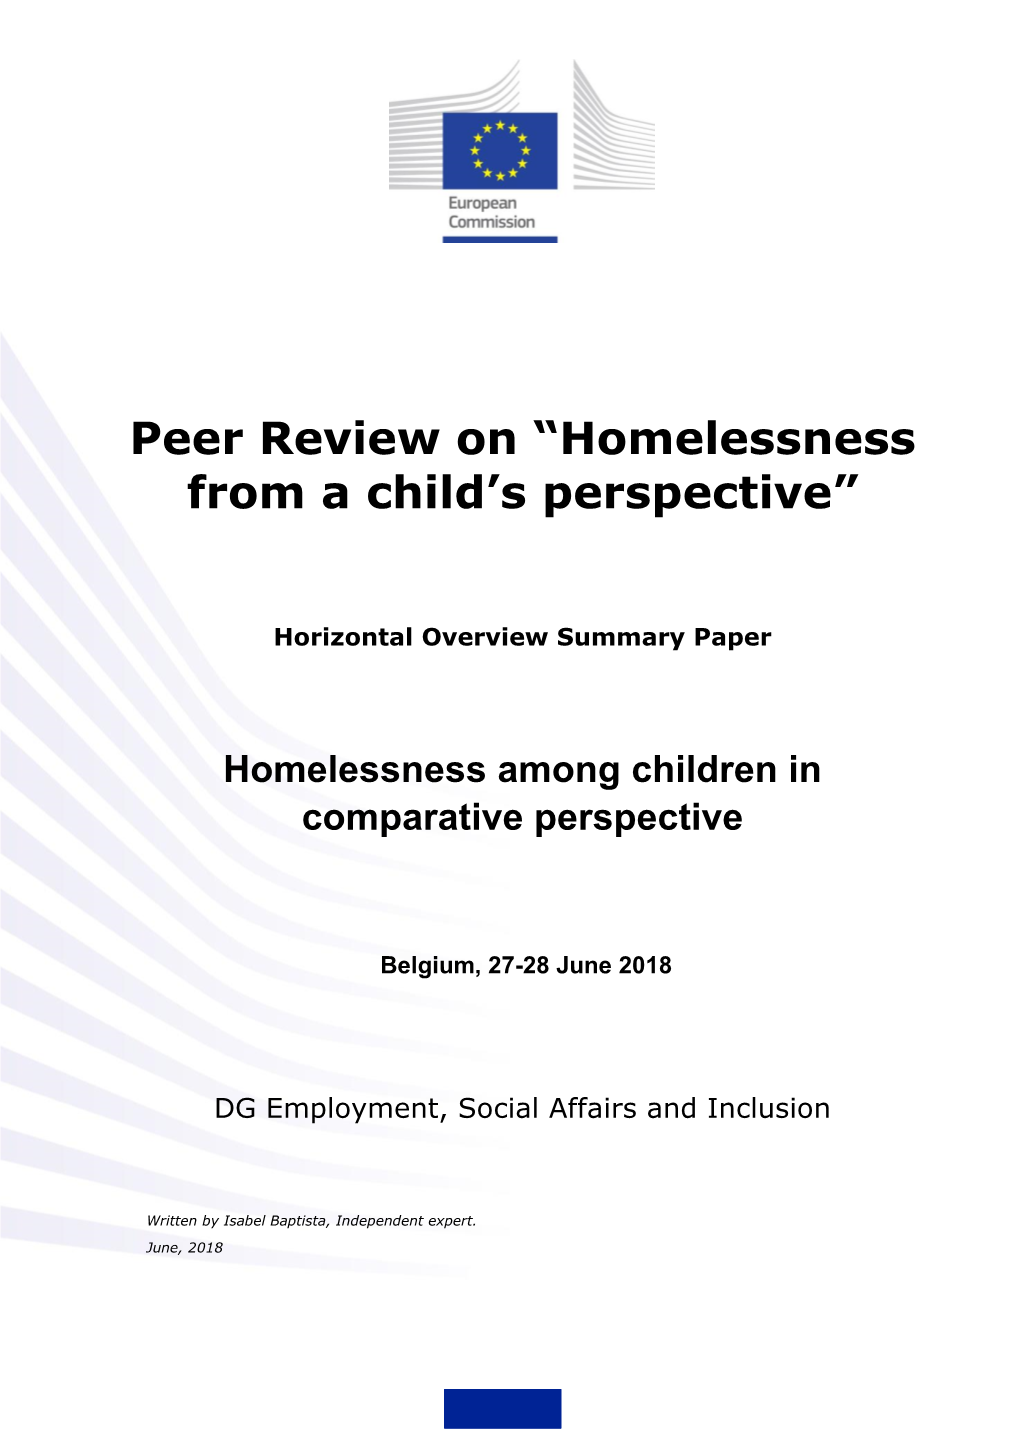 Peer Review on “Homelessness from a Child's Perspective”